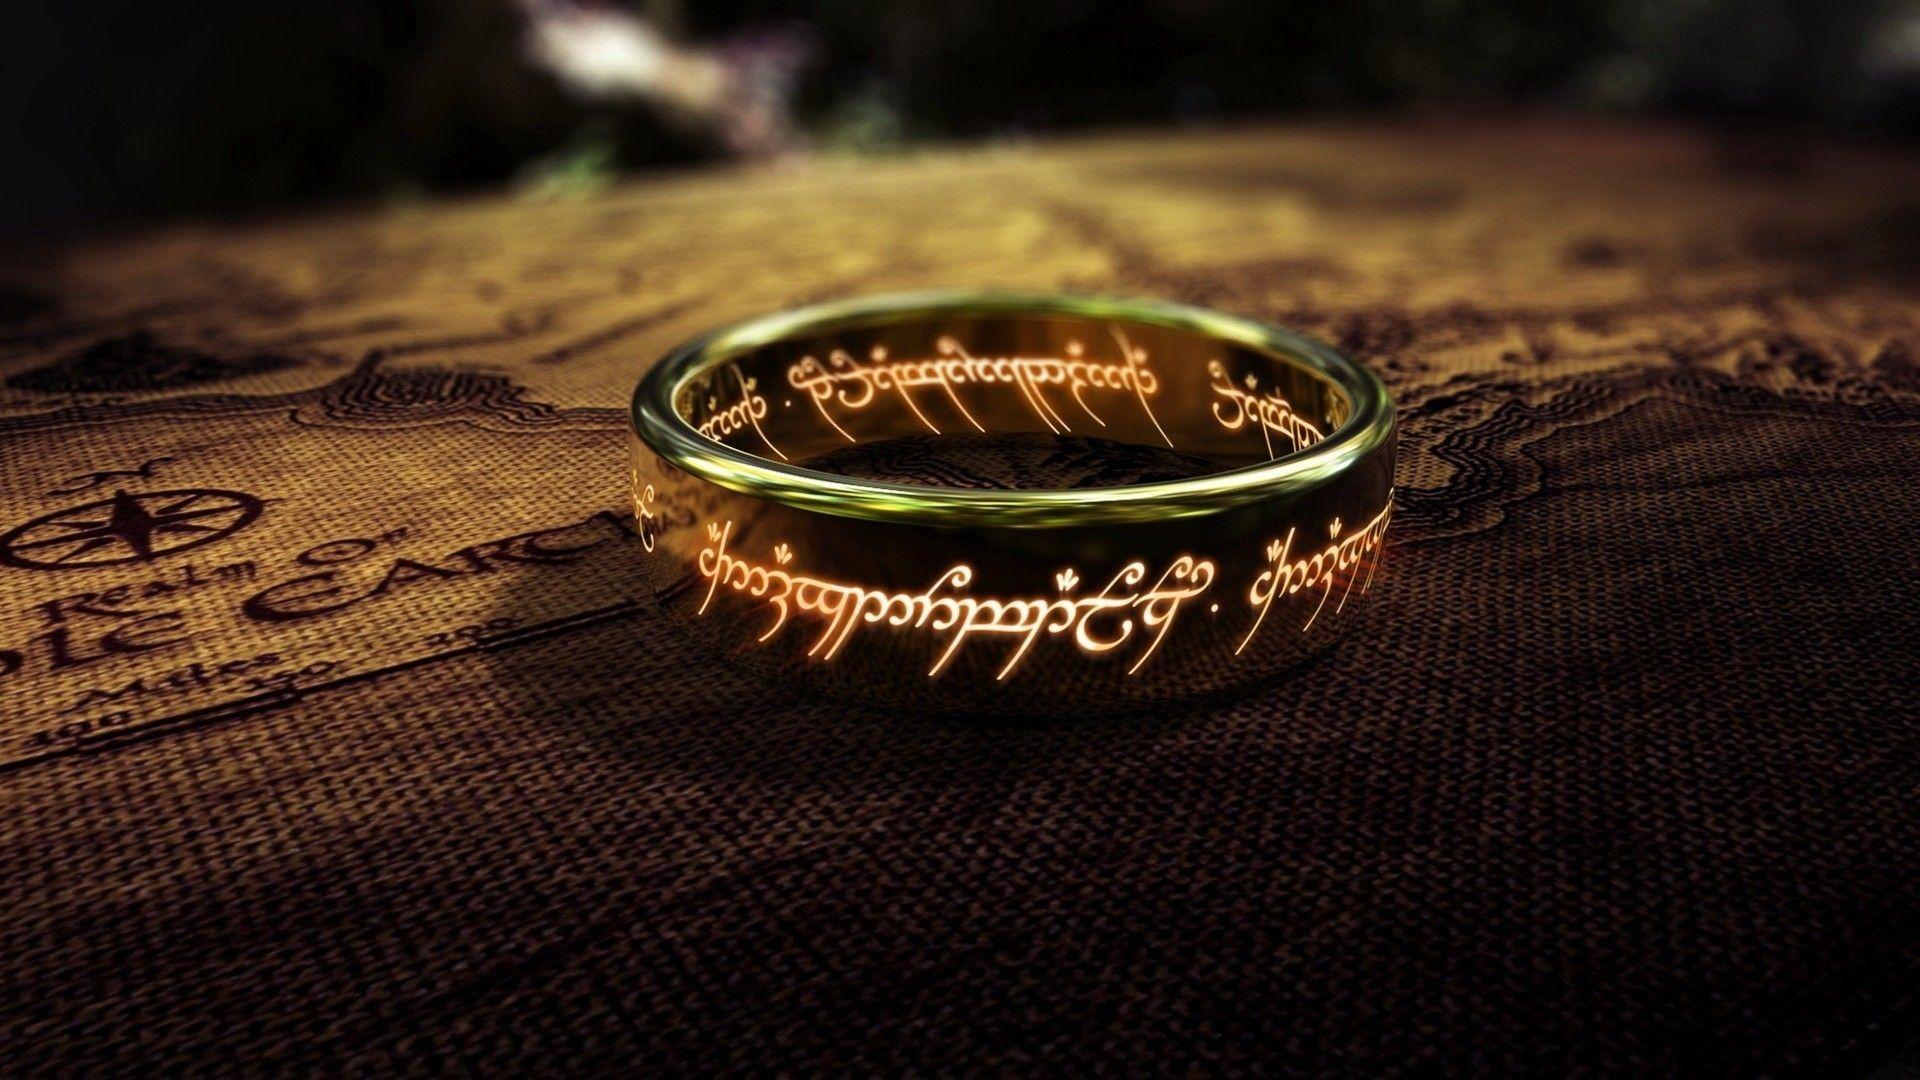 Lord Of The Rings Wallpaper Android, Picture